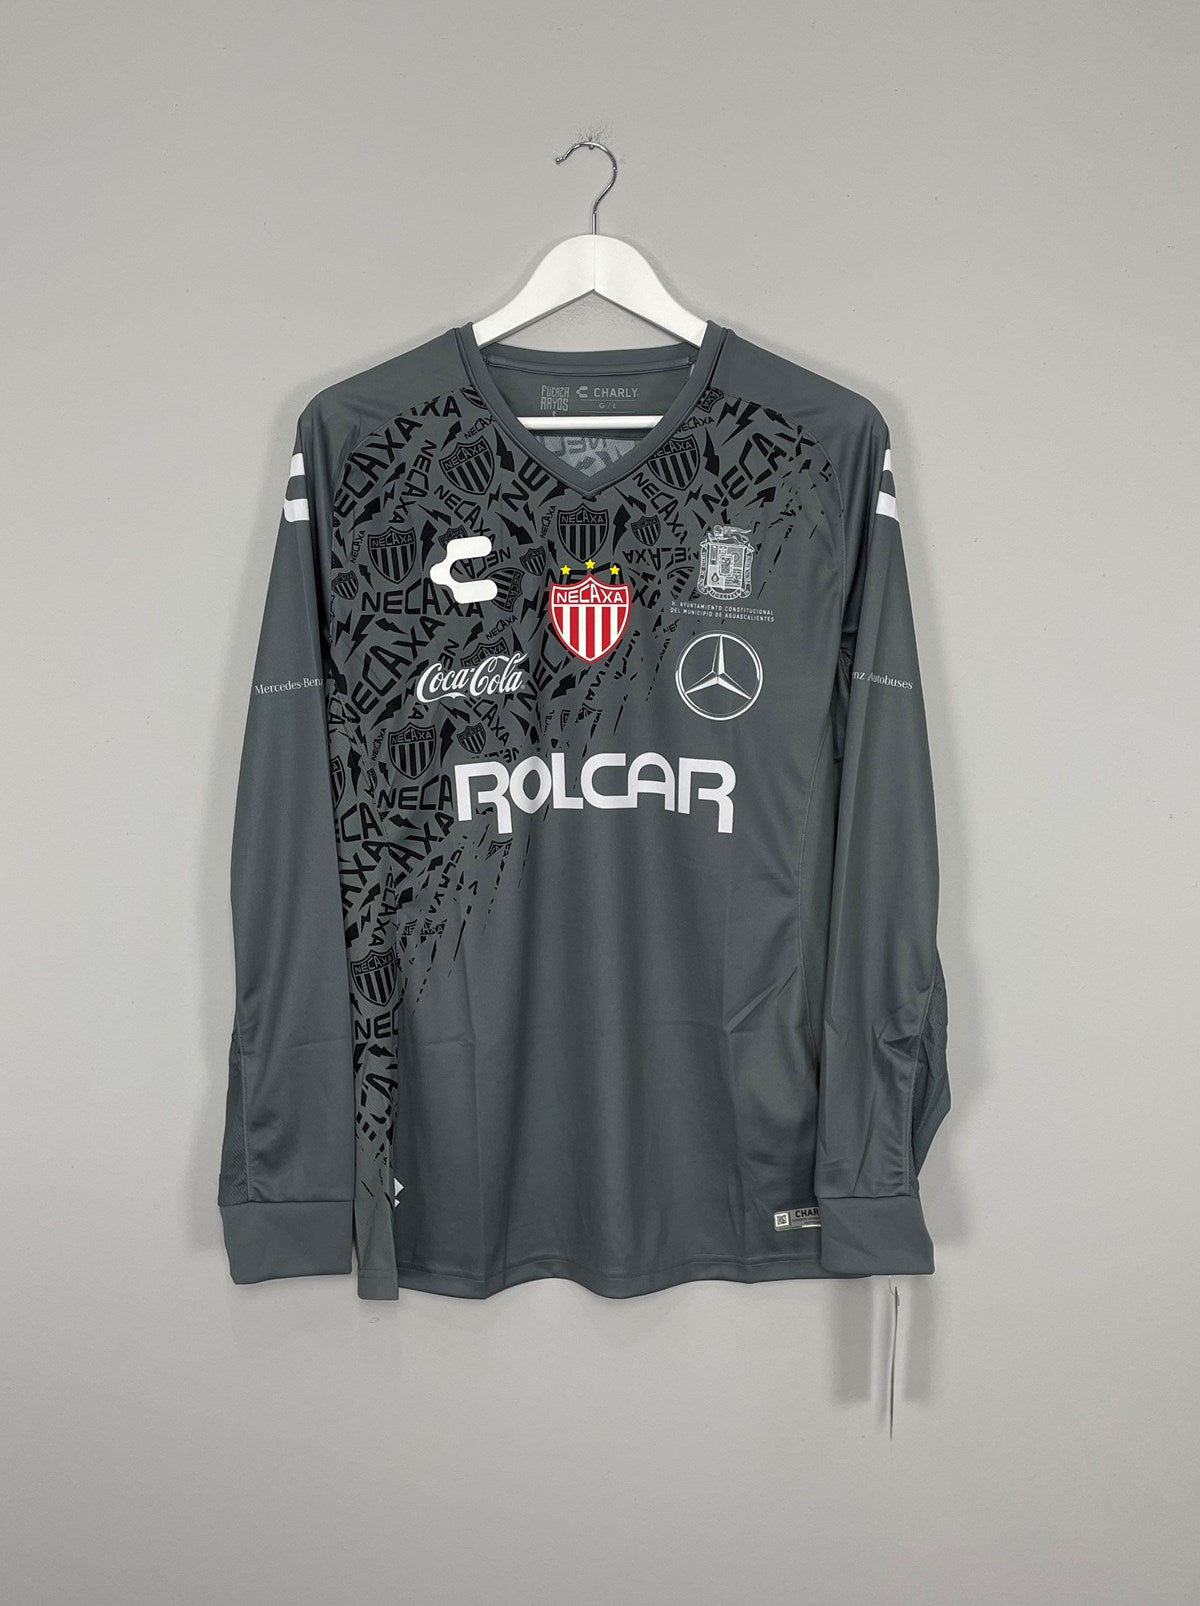 2019/20 NECAXA L/S AWAY SHIRT (MULTIPLE SIZES) CHARLY FUTBOL, XL / Other Mexican Clubs / 2019